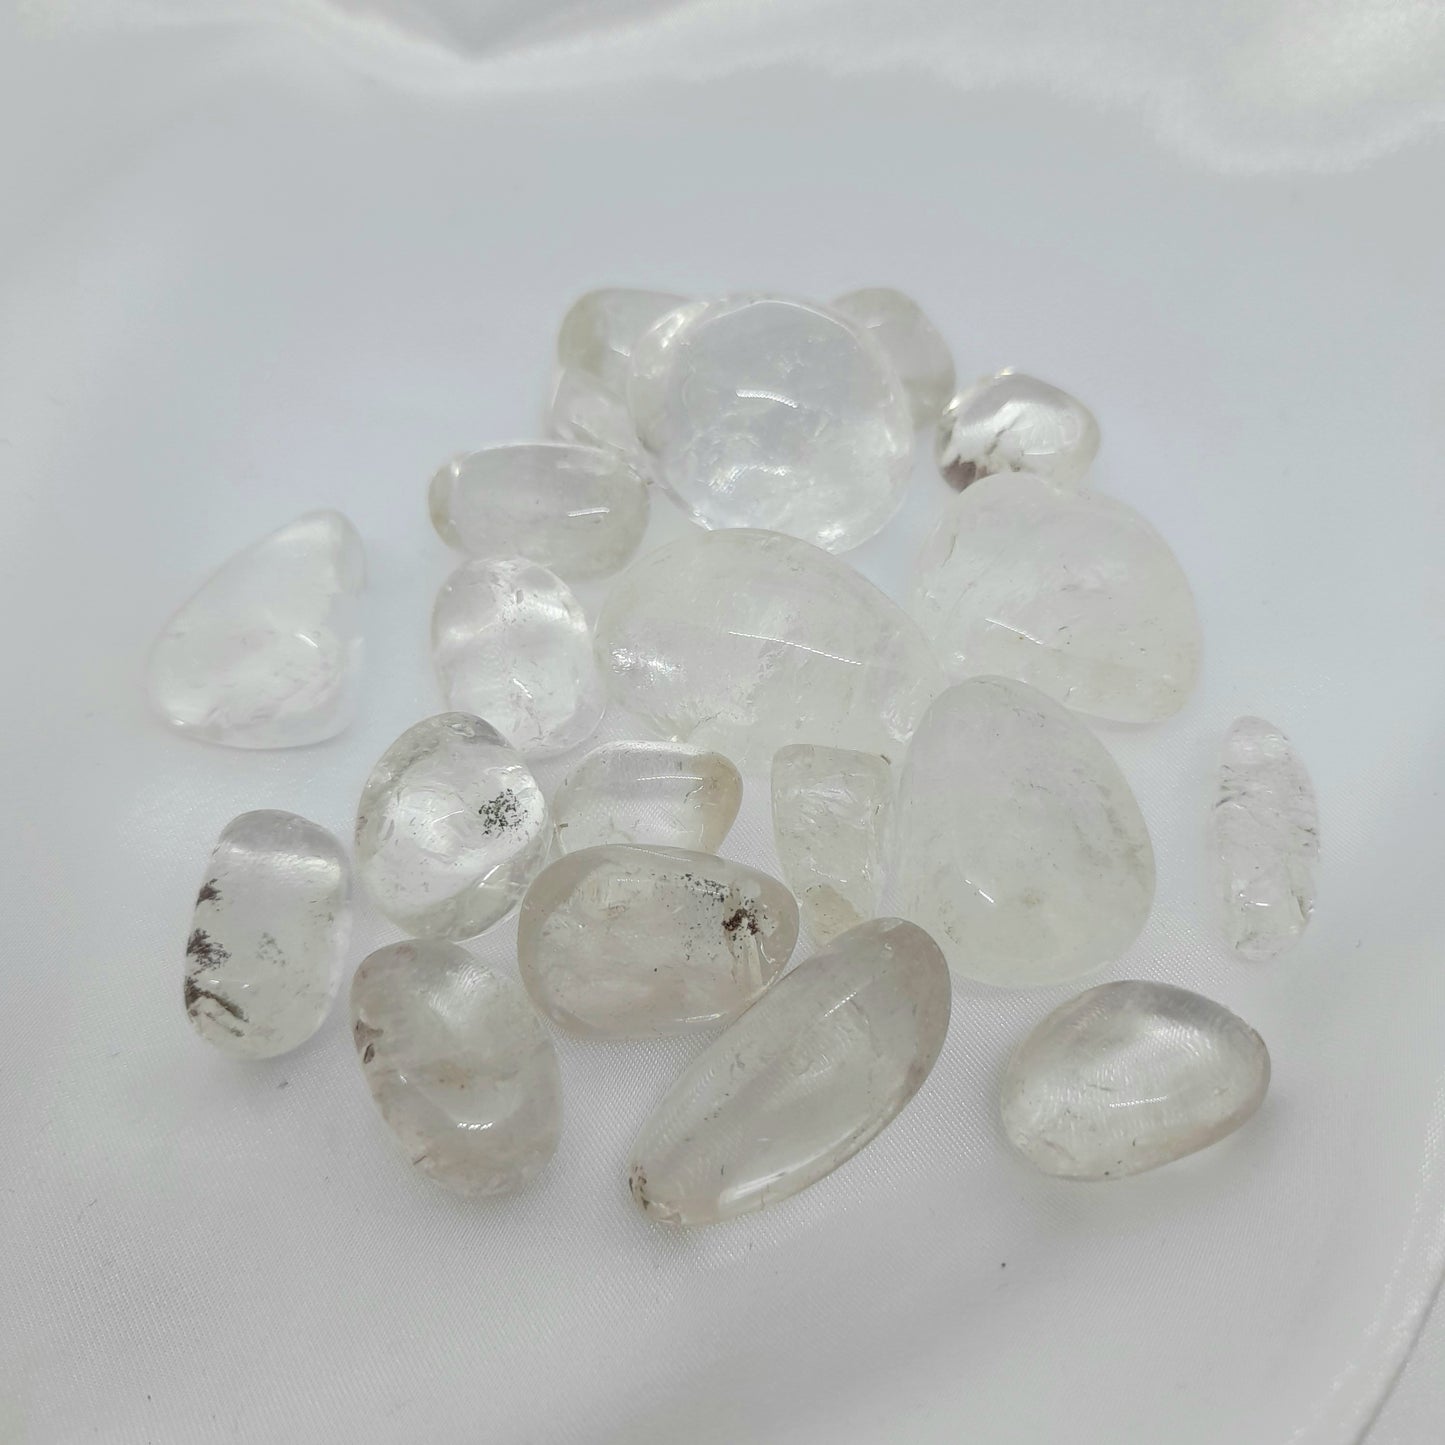 Clear Quartz Tumble - Master Healer and Amplifier Crystal - Spiritual and Magical Healing - Enhances Personal and Crystal Abilities 